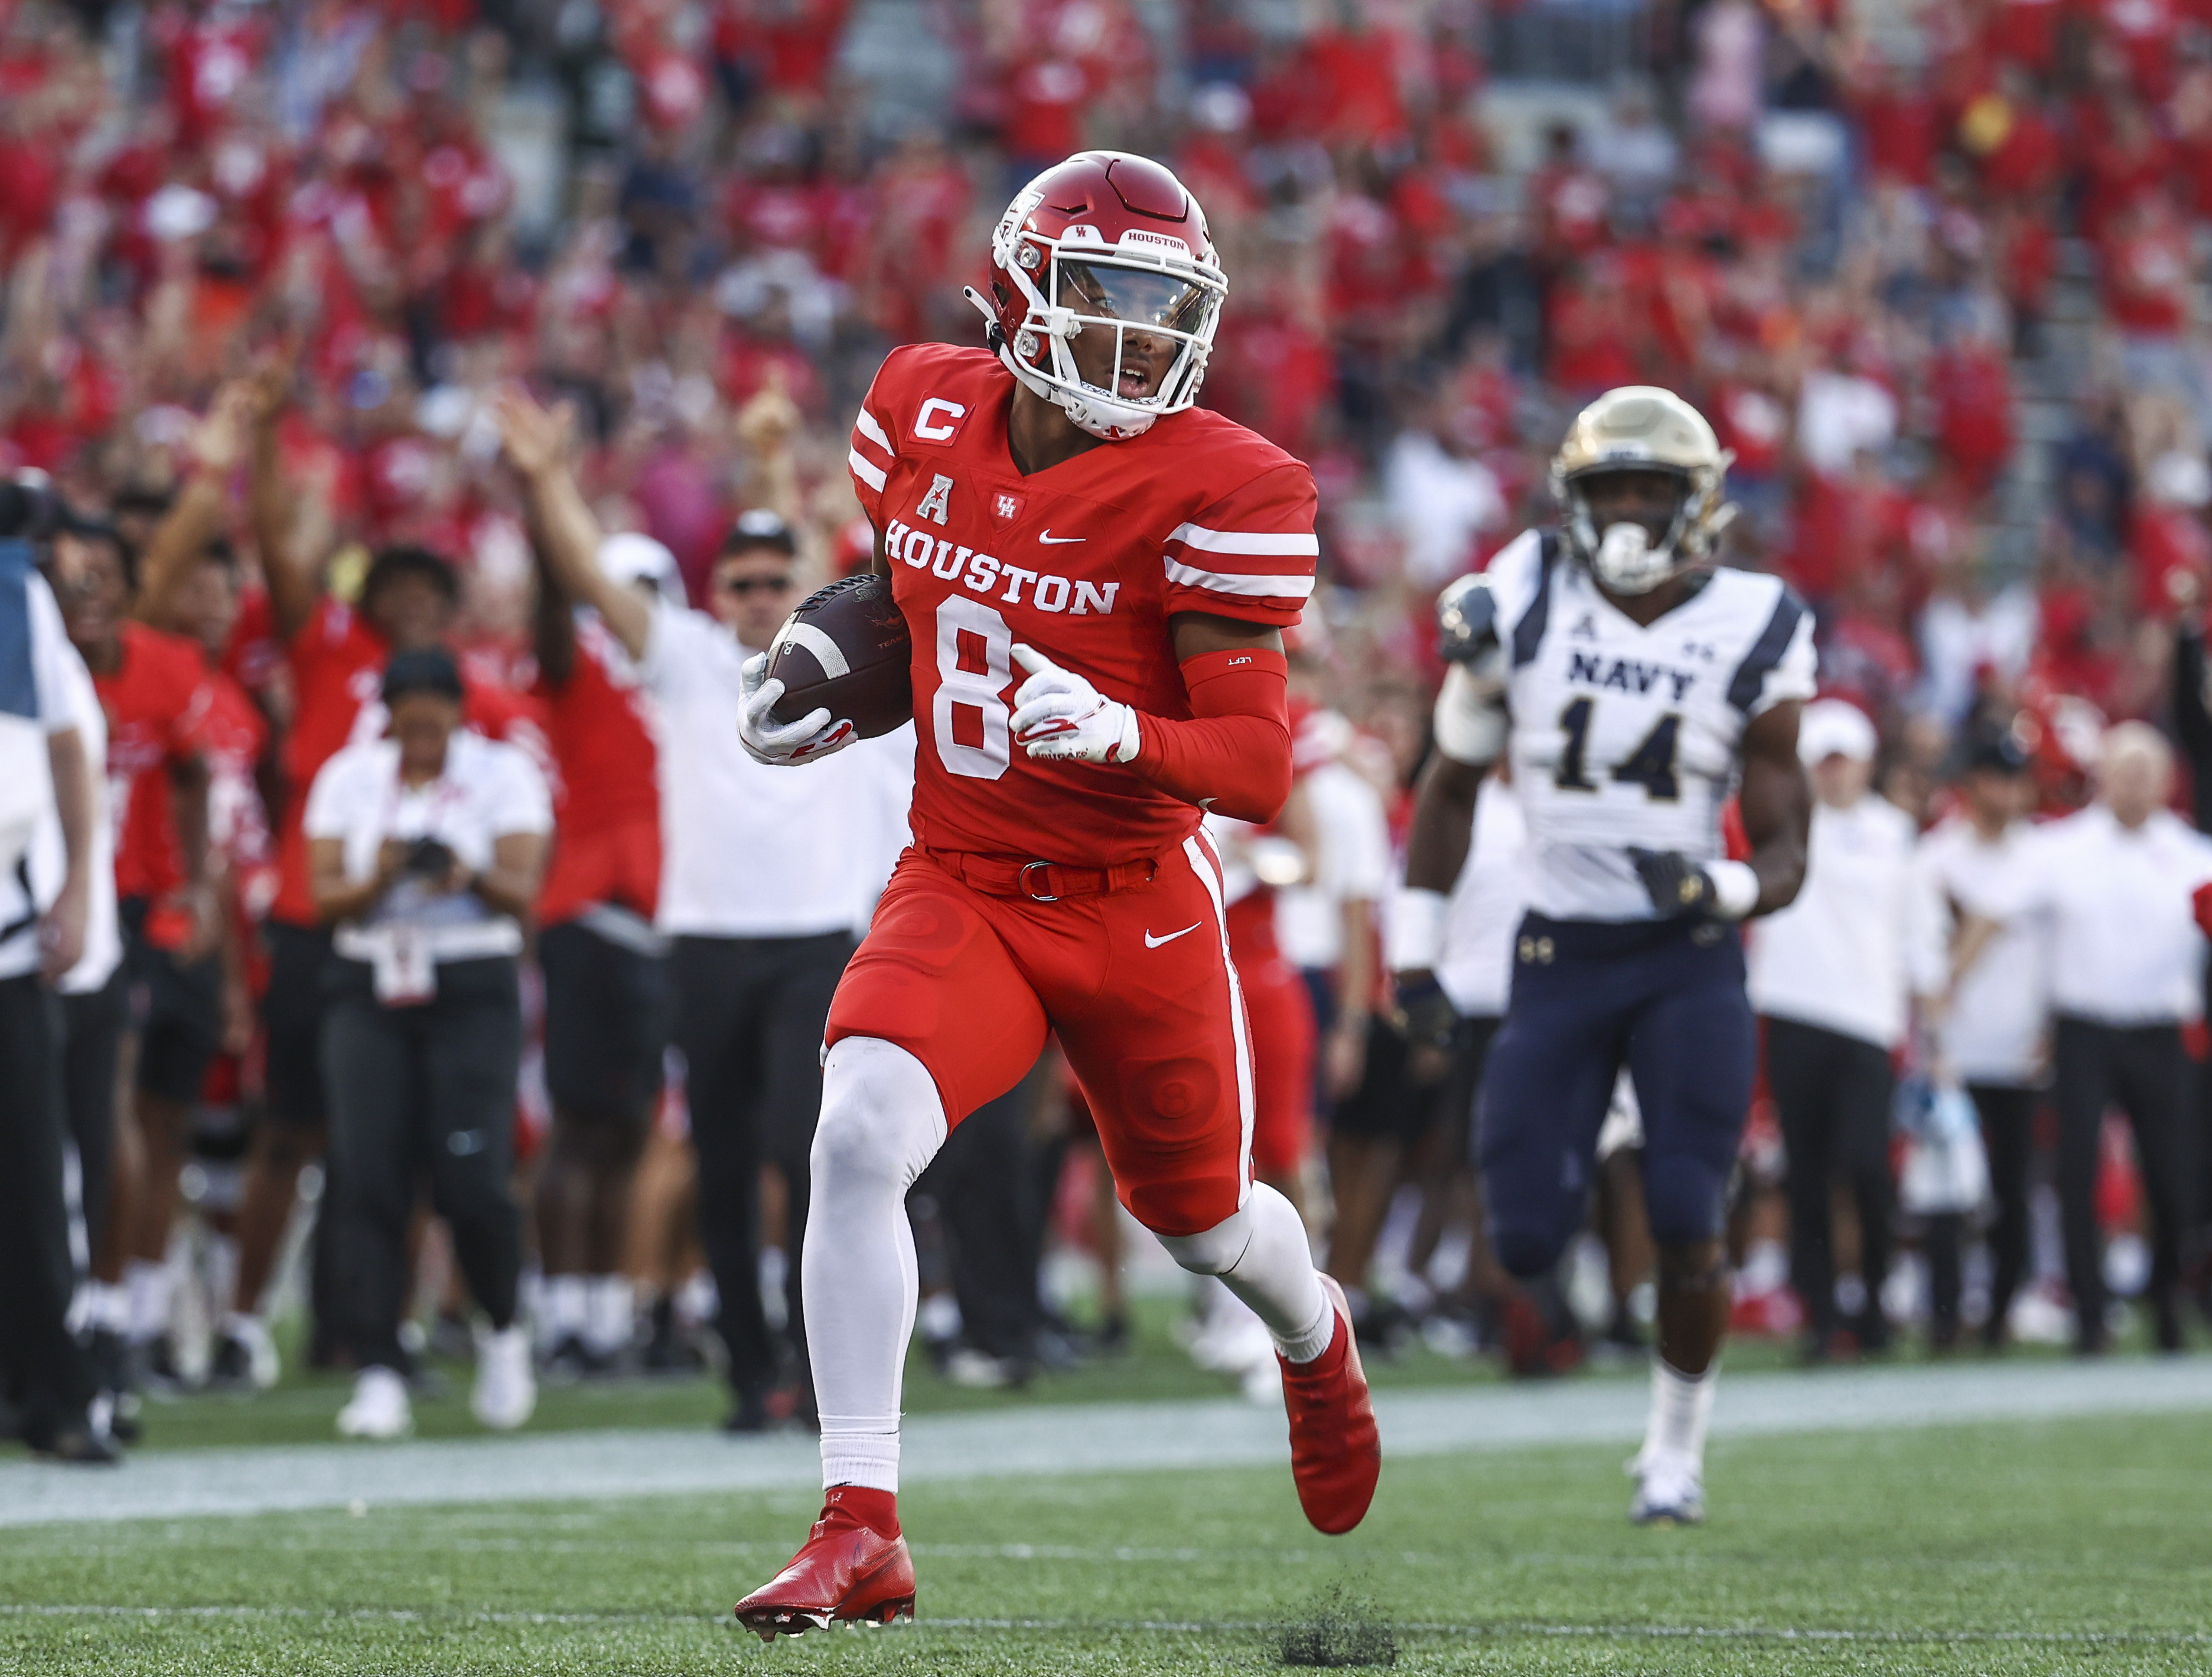 Houston Cougars cornerback Marcus Jones (8) returns a punt for a touchdown during the first quarter against the Navy Midshipmen at TDECU Stadium.